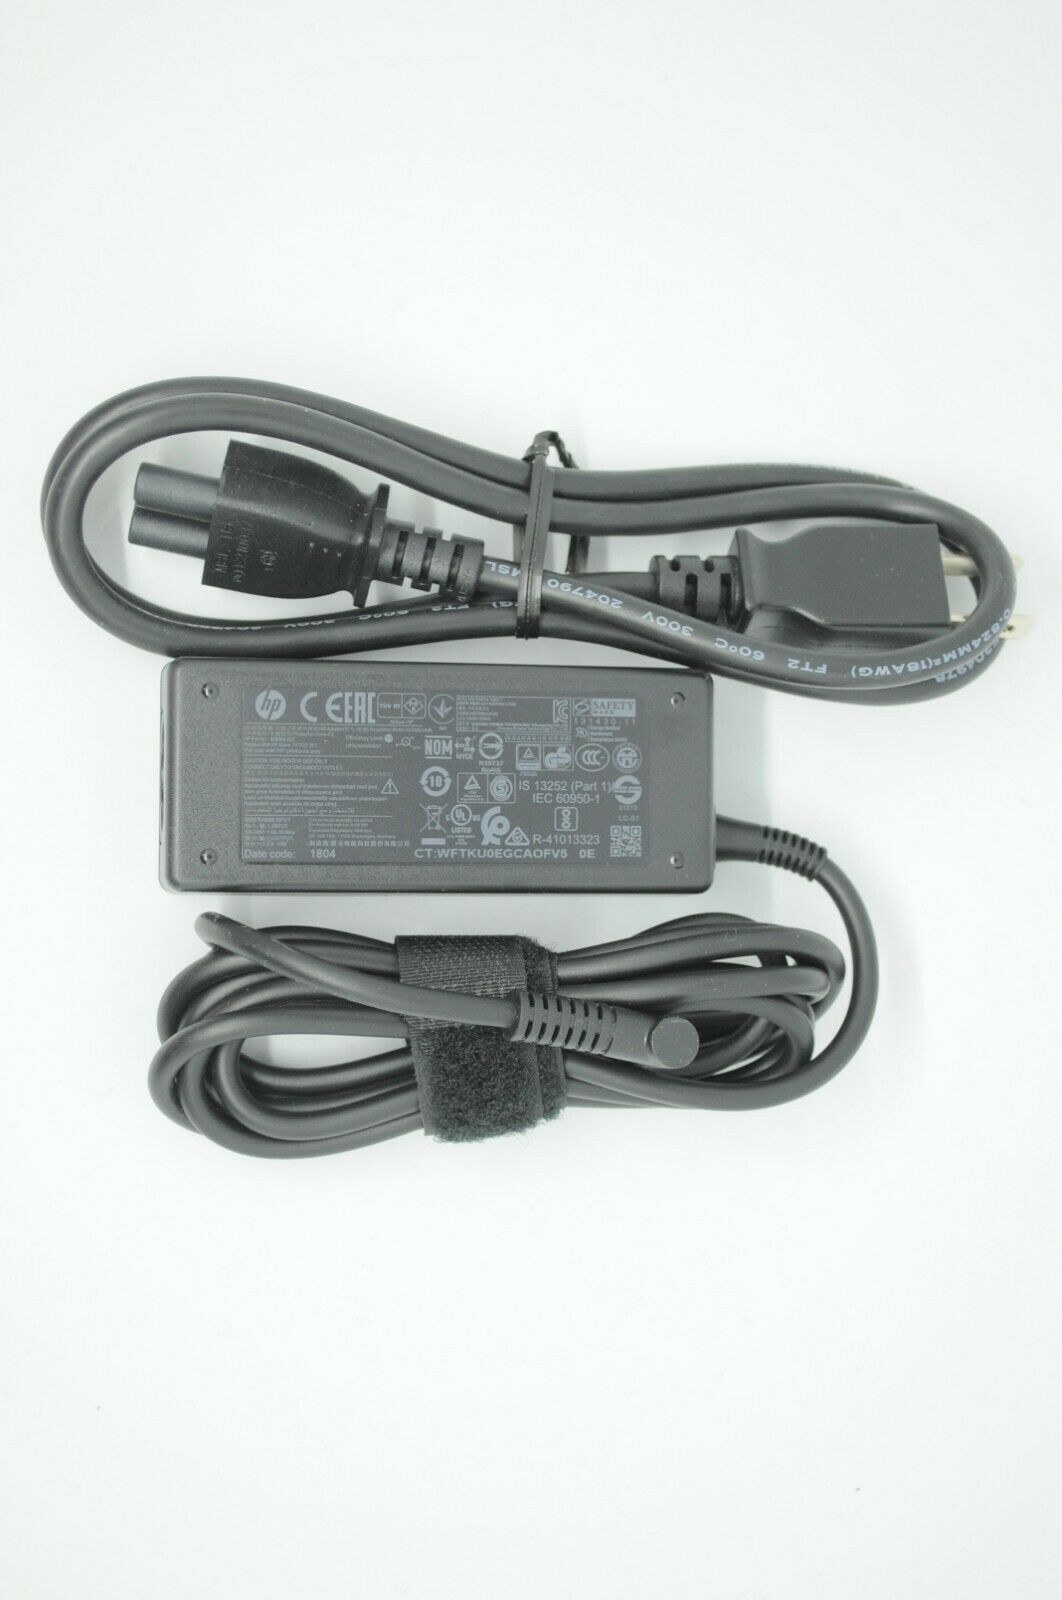 NEW Genuine OEM Power Adapter Charger for HP Laptop 17-X022CY (1VK80UA) Color: Black Brand: HP MPN: 741727-001, 719